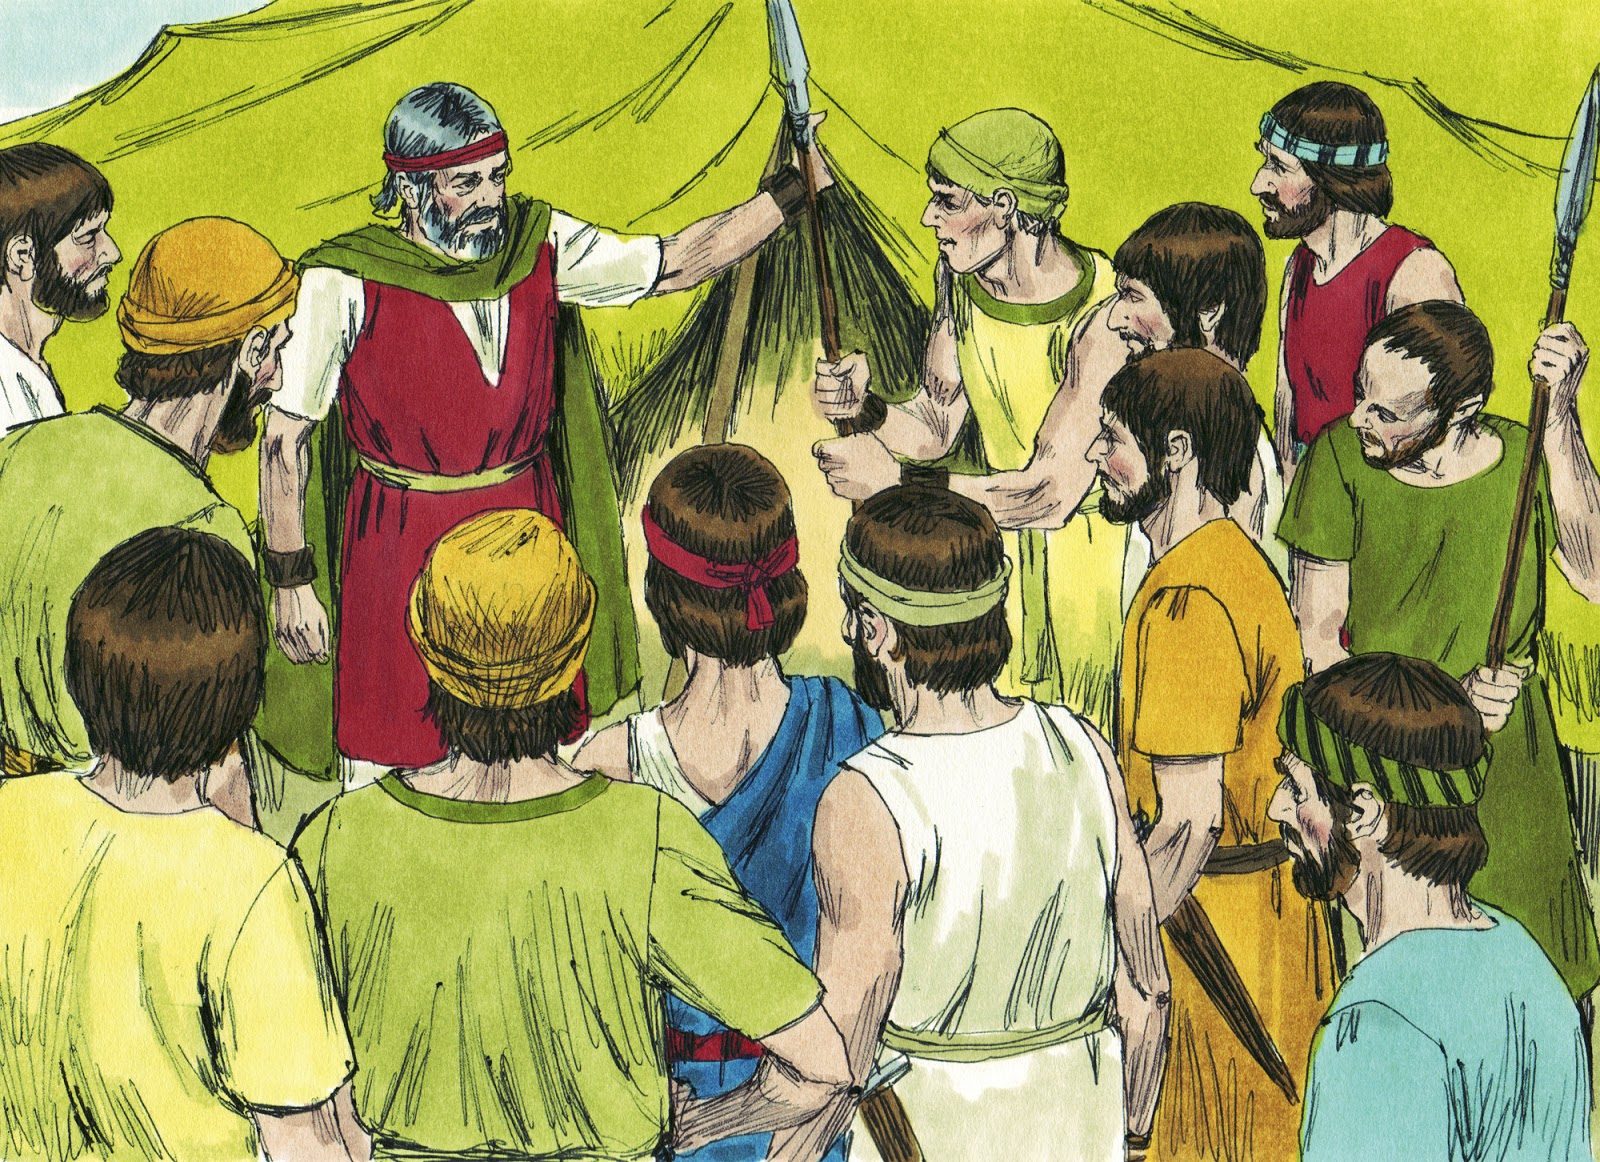 bible-fun-for-kids-moses-joshua-12-spies-sent-to-canaan